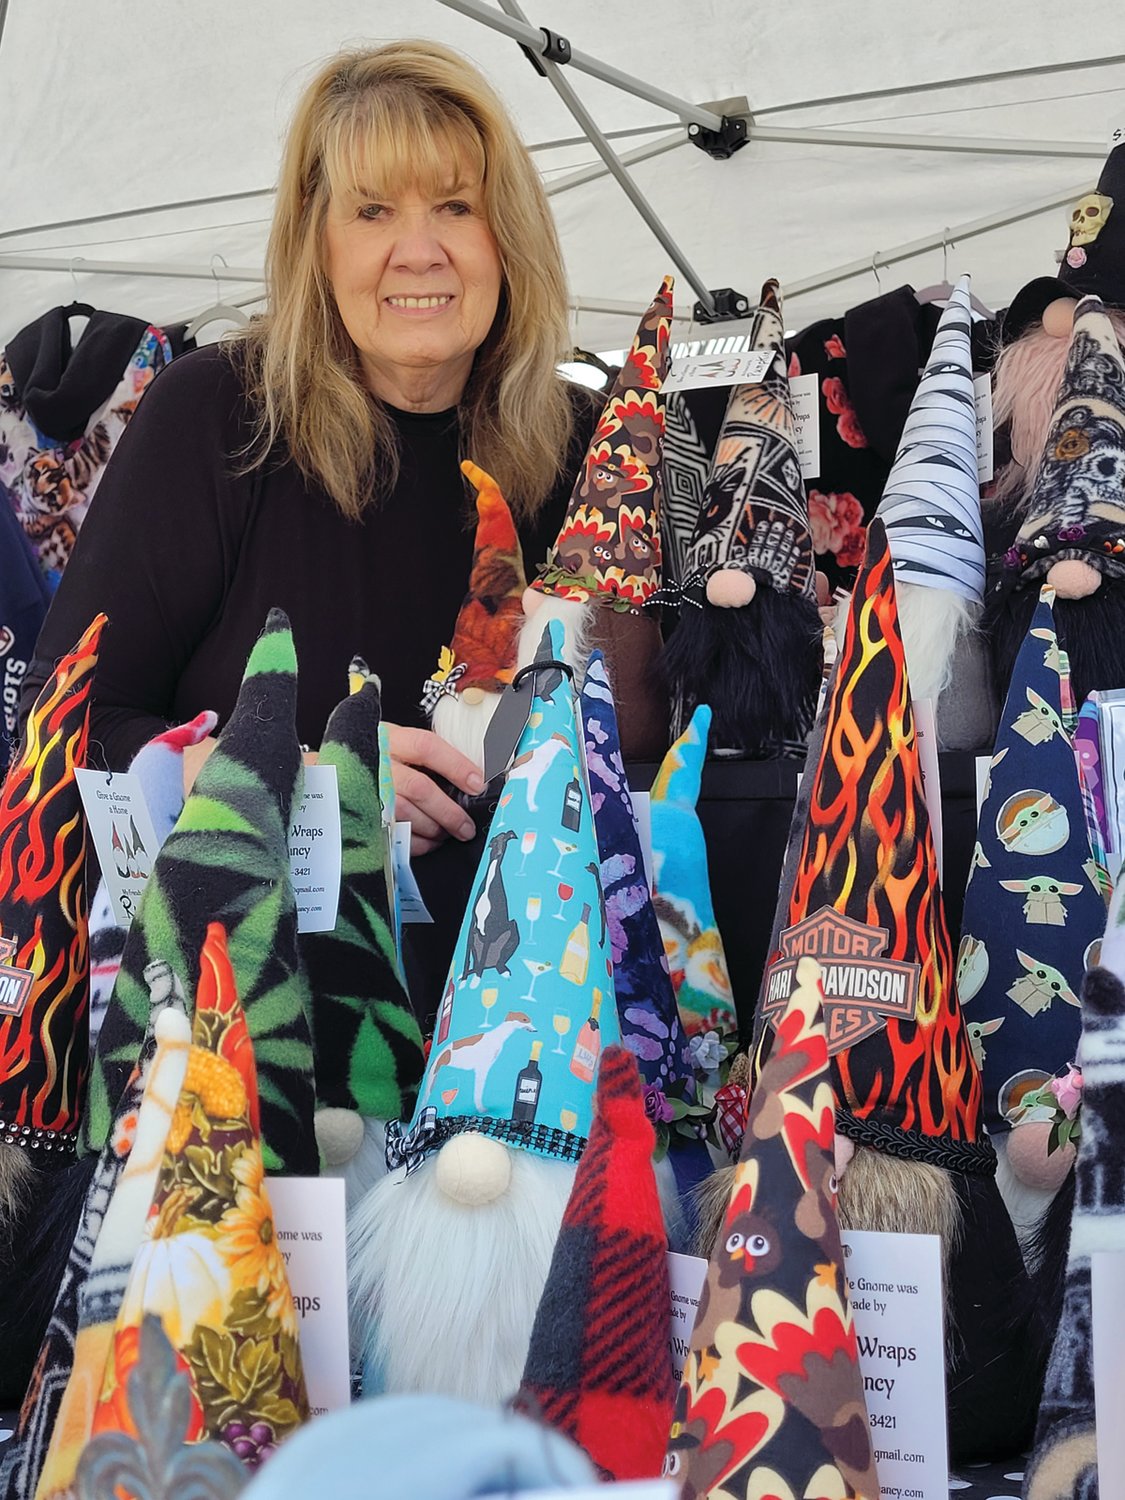 GNOME SWEET GNOME: Nancy Howlett designs “Fashion Wraps” and sold a variety of gnomes just inside the entrance to the Apple Festival.